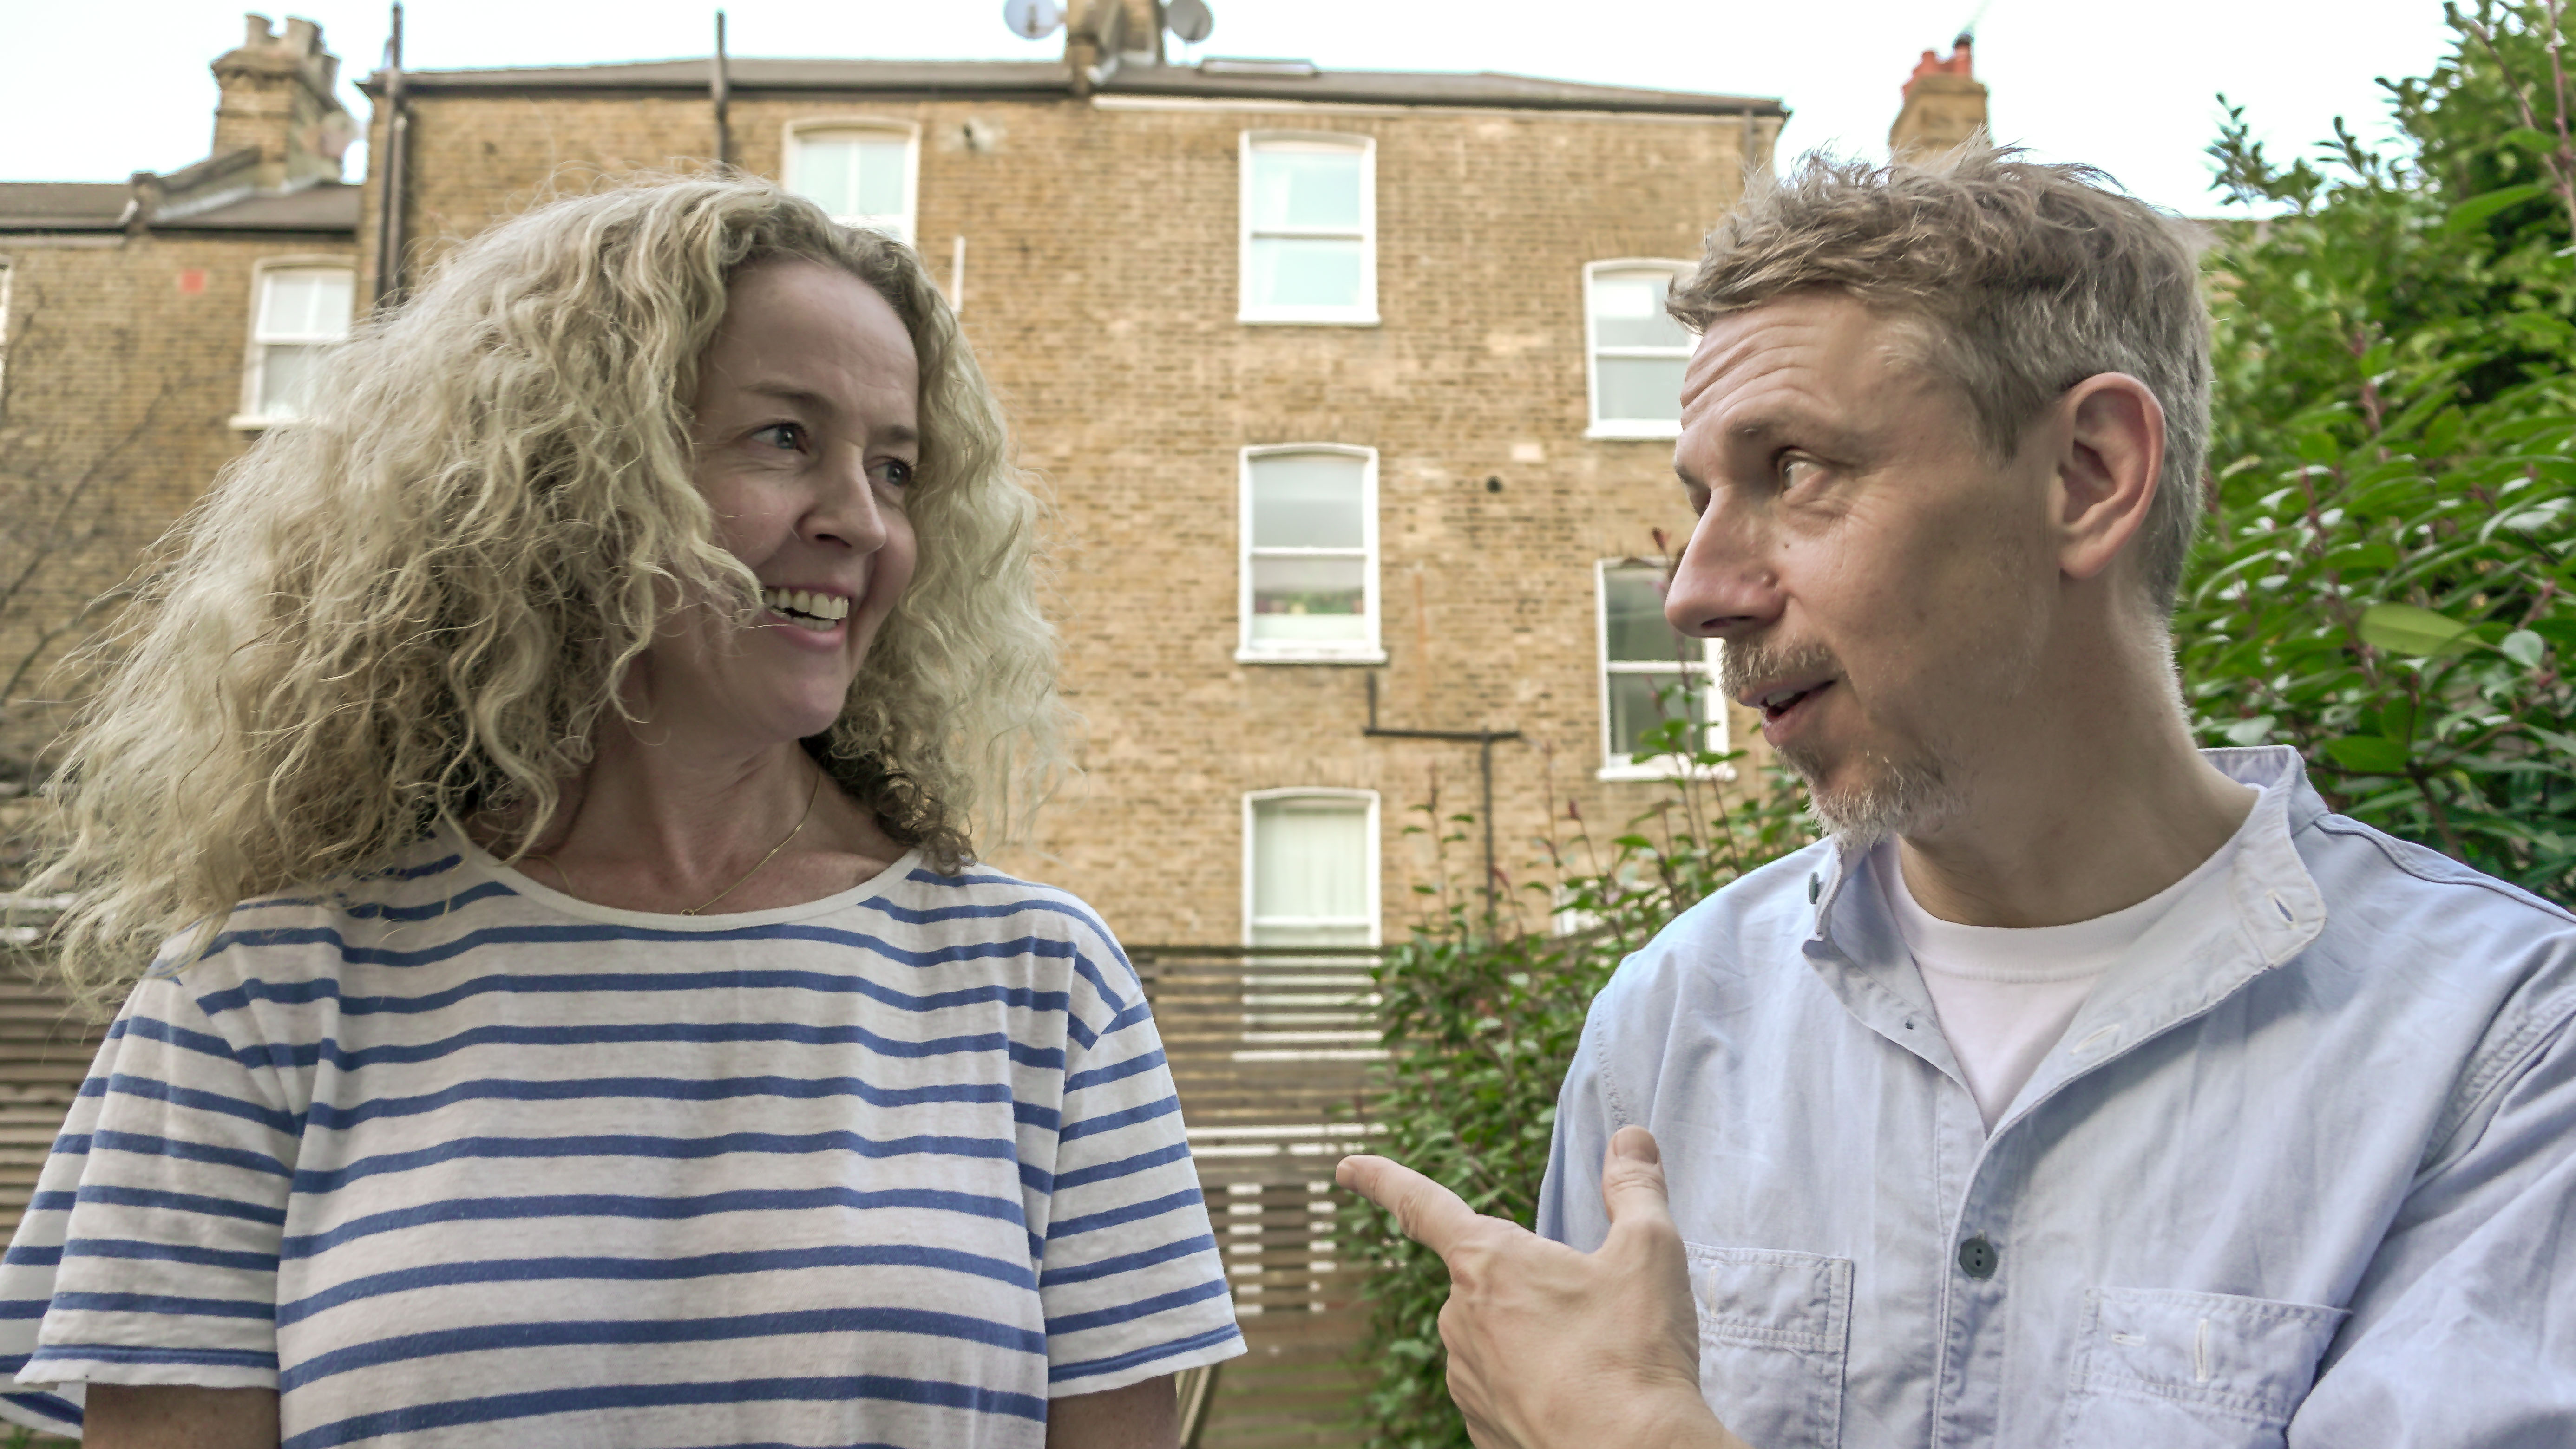 Brownswood Basement: Gilles Peterson with Deirdre O Callaghan, Kokoroko  (Live), Perry Louis and Ola Szmidt (Live) – Worldwide FM